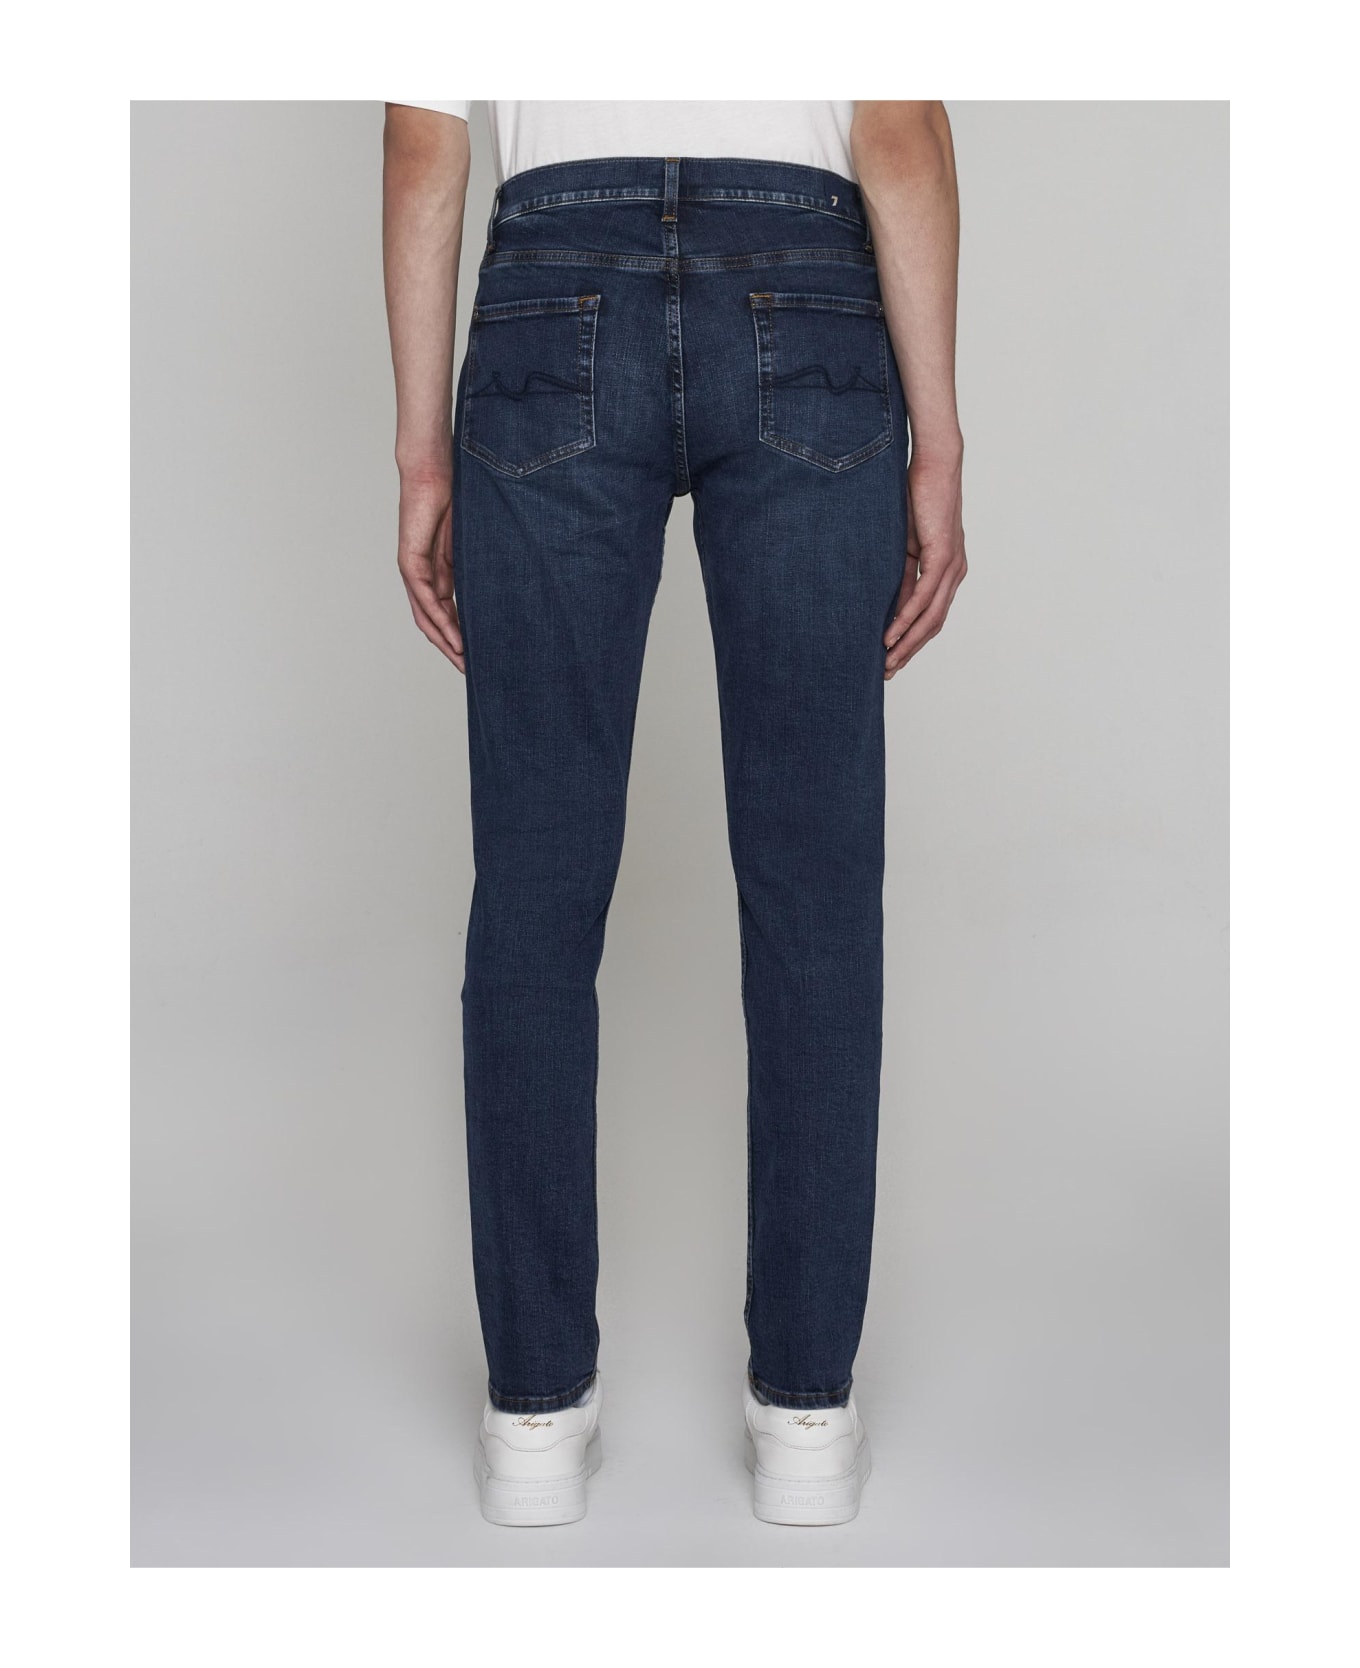 7 For All Mankind Slimmy Tapered Jeans - DENIM BLUE